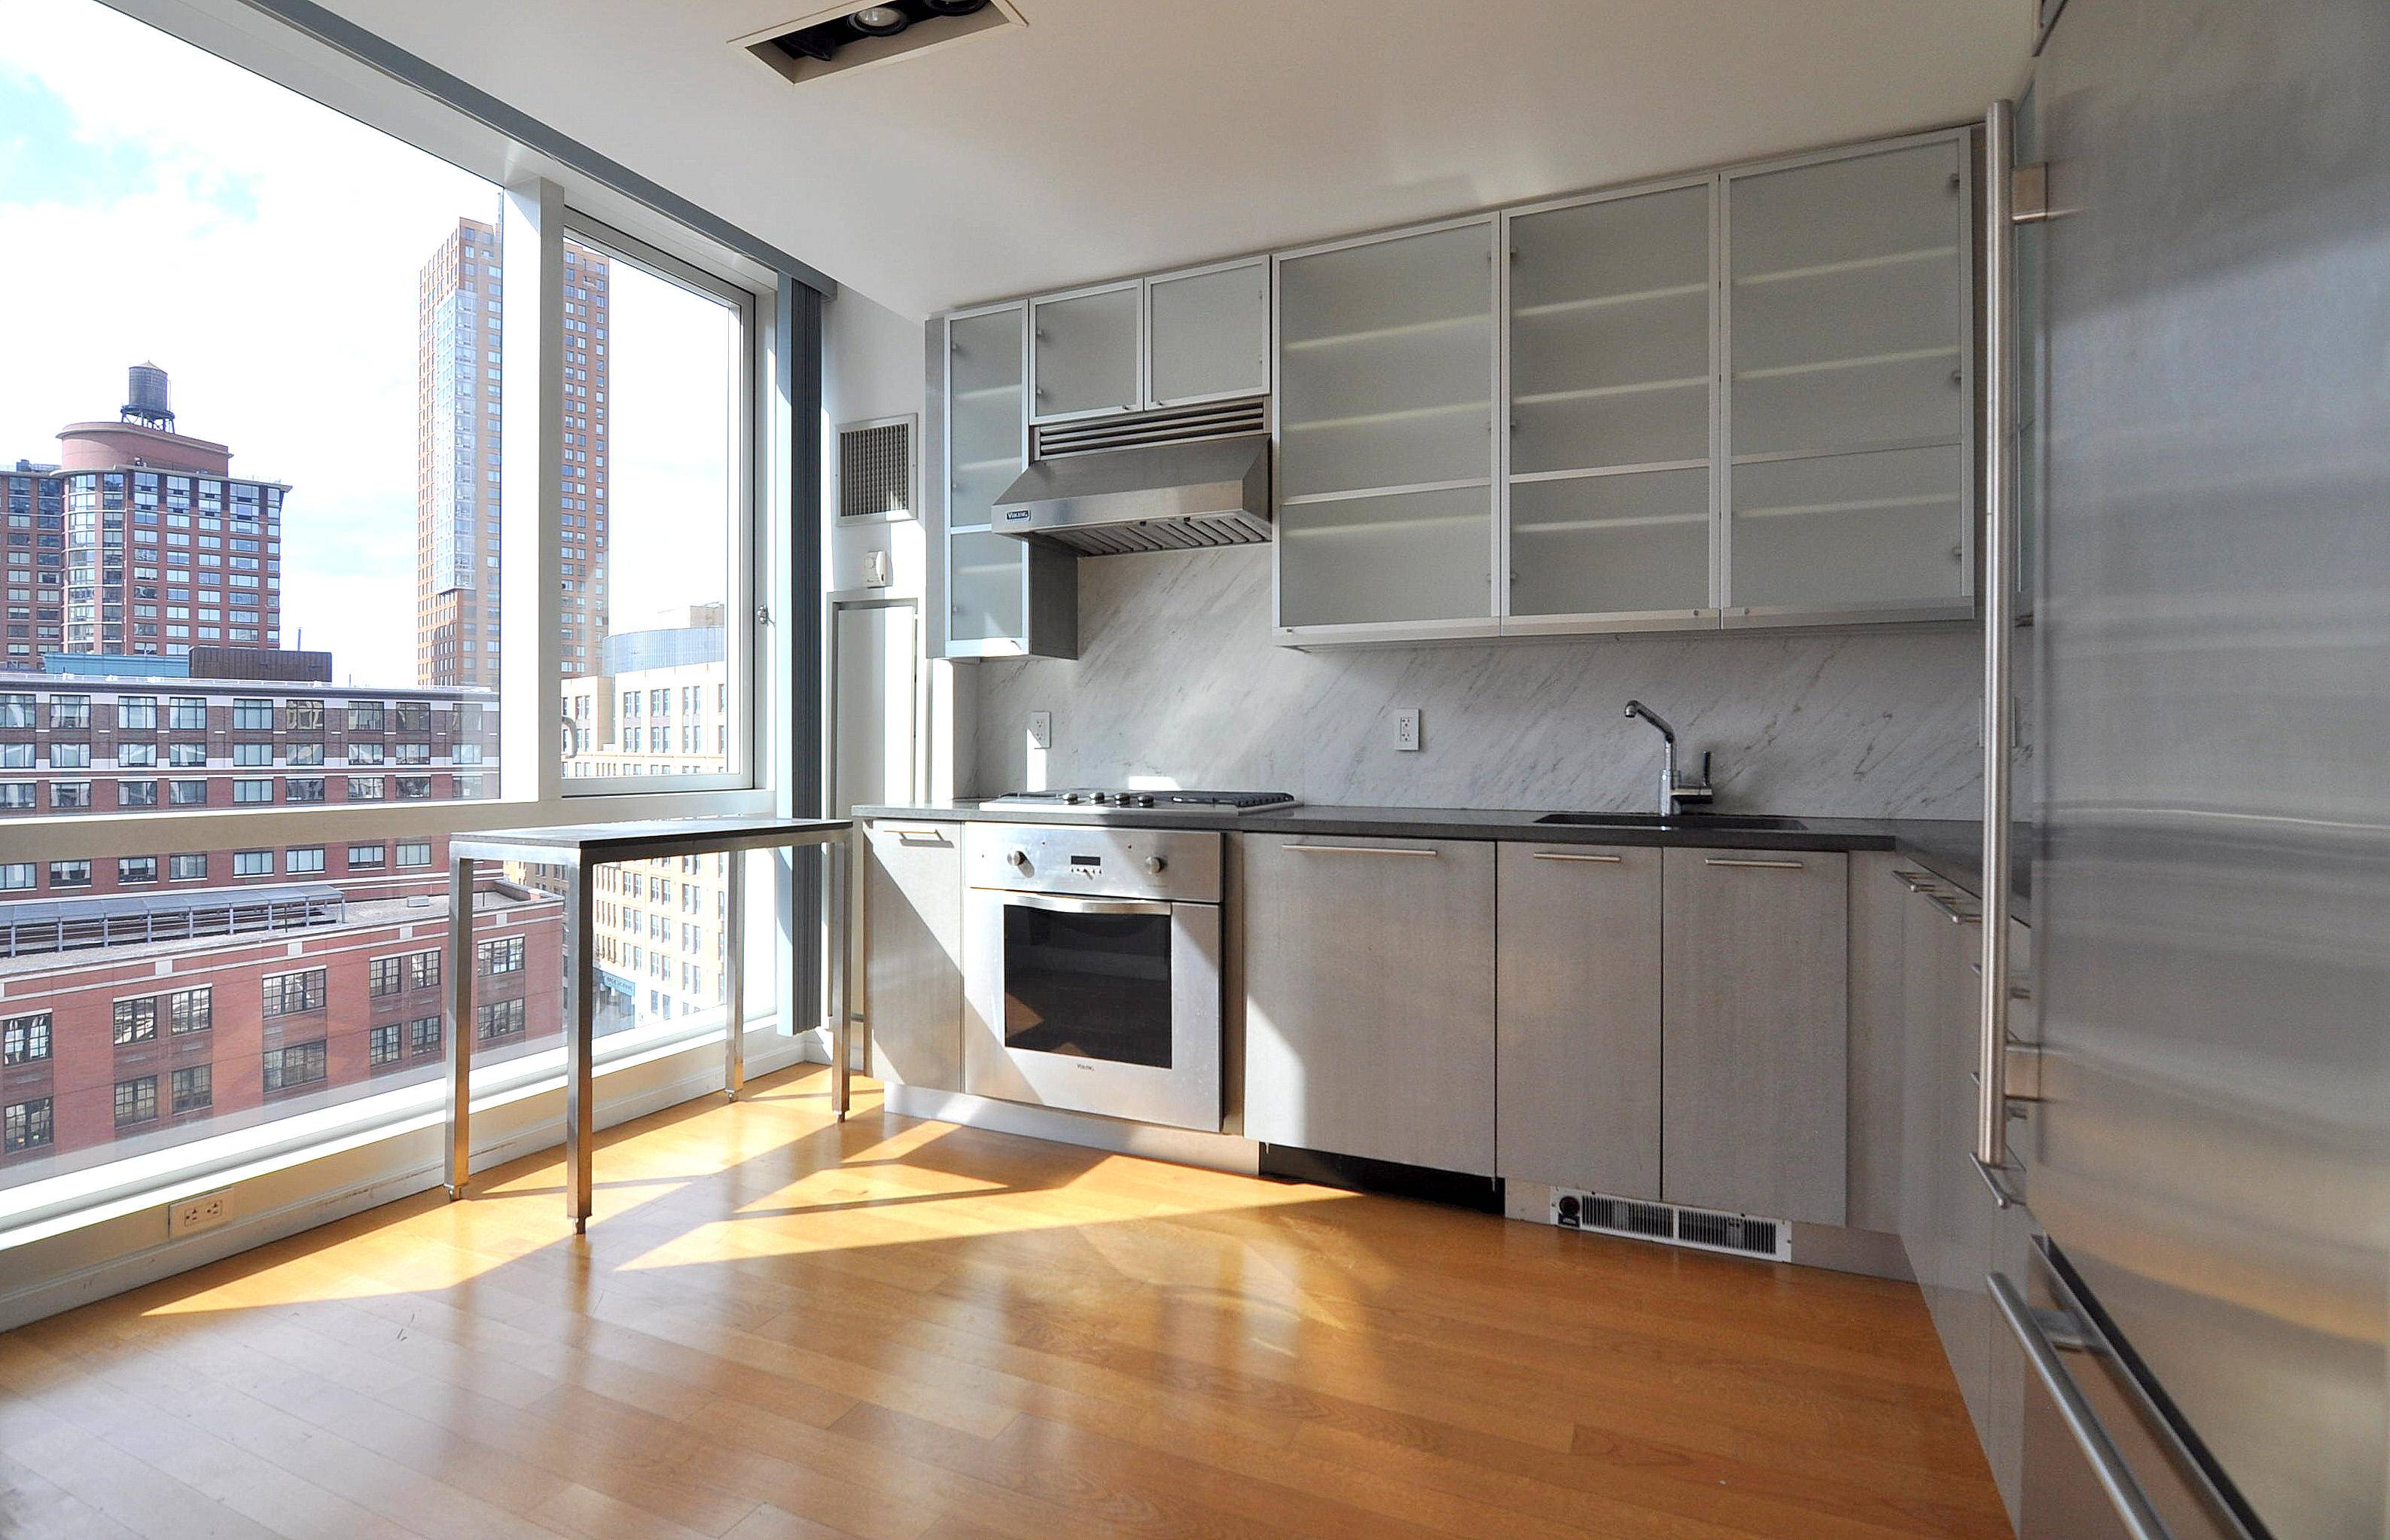 NEW TO MARKET! SPACIOUS 2 BEDROOM APARTMENT IN TRIBECA!